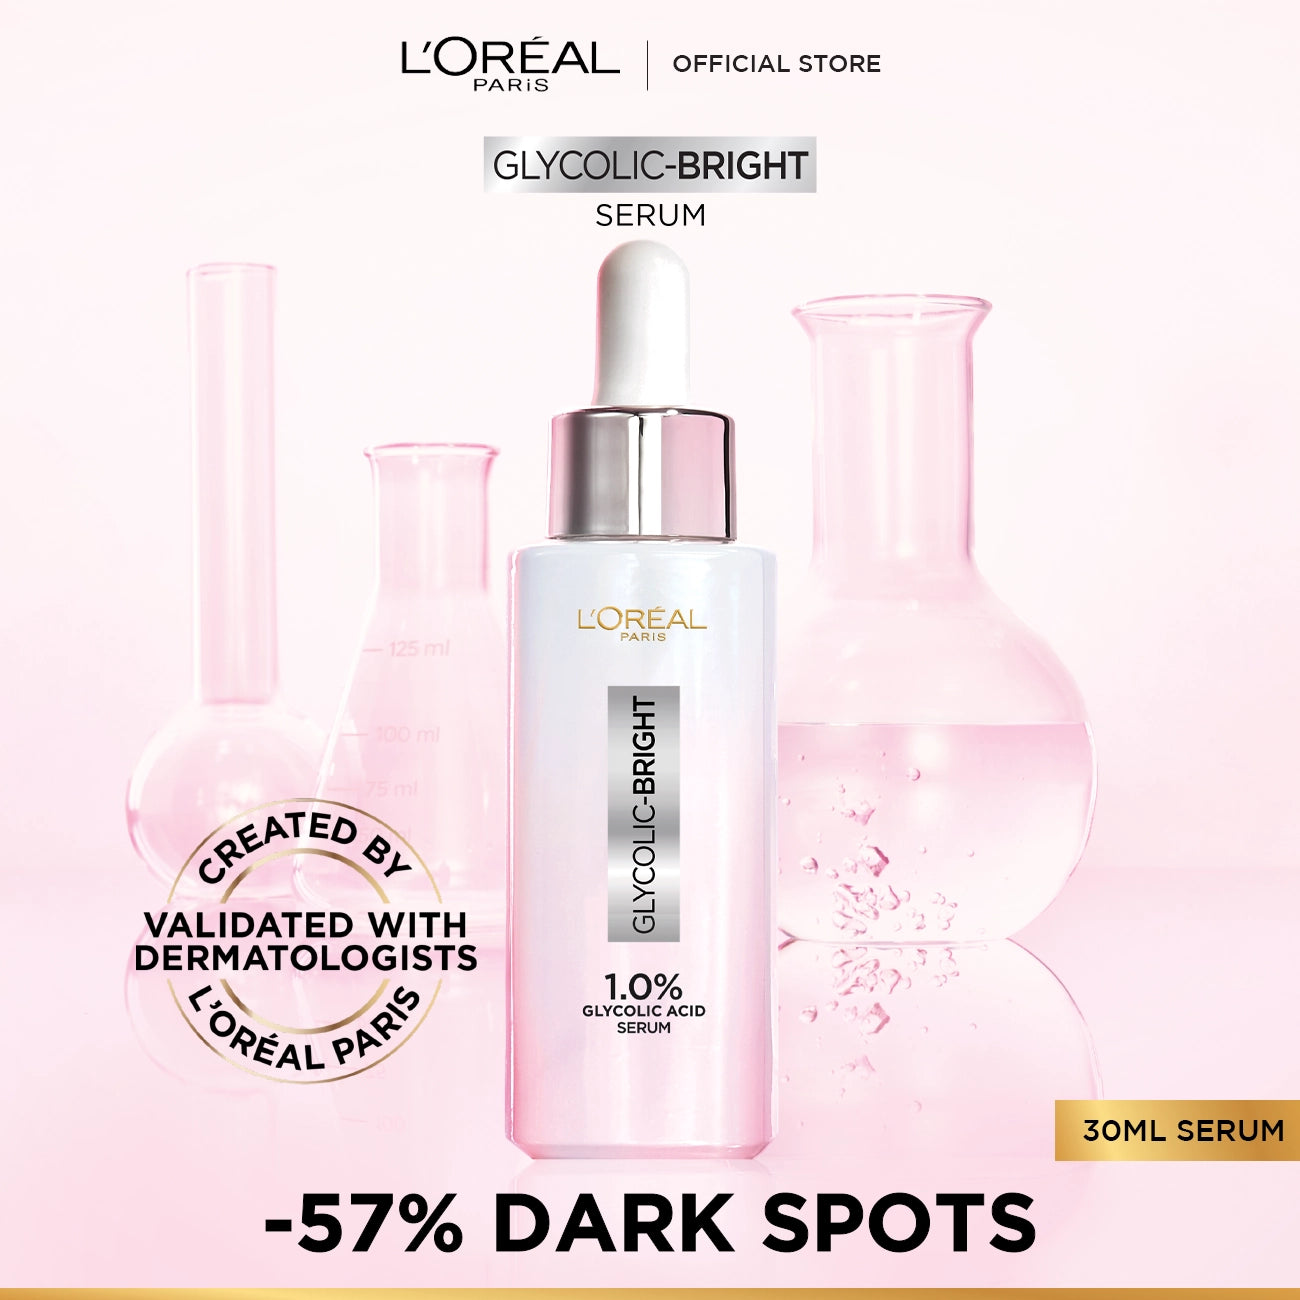 Loreal Paris Glycolic Bright Instant Glowing Face Serum – 30ml